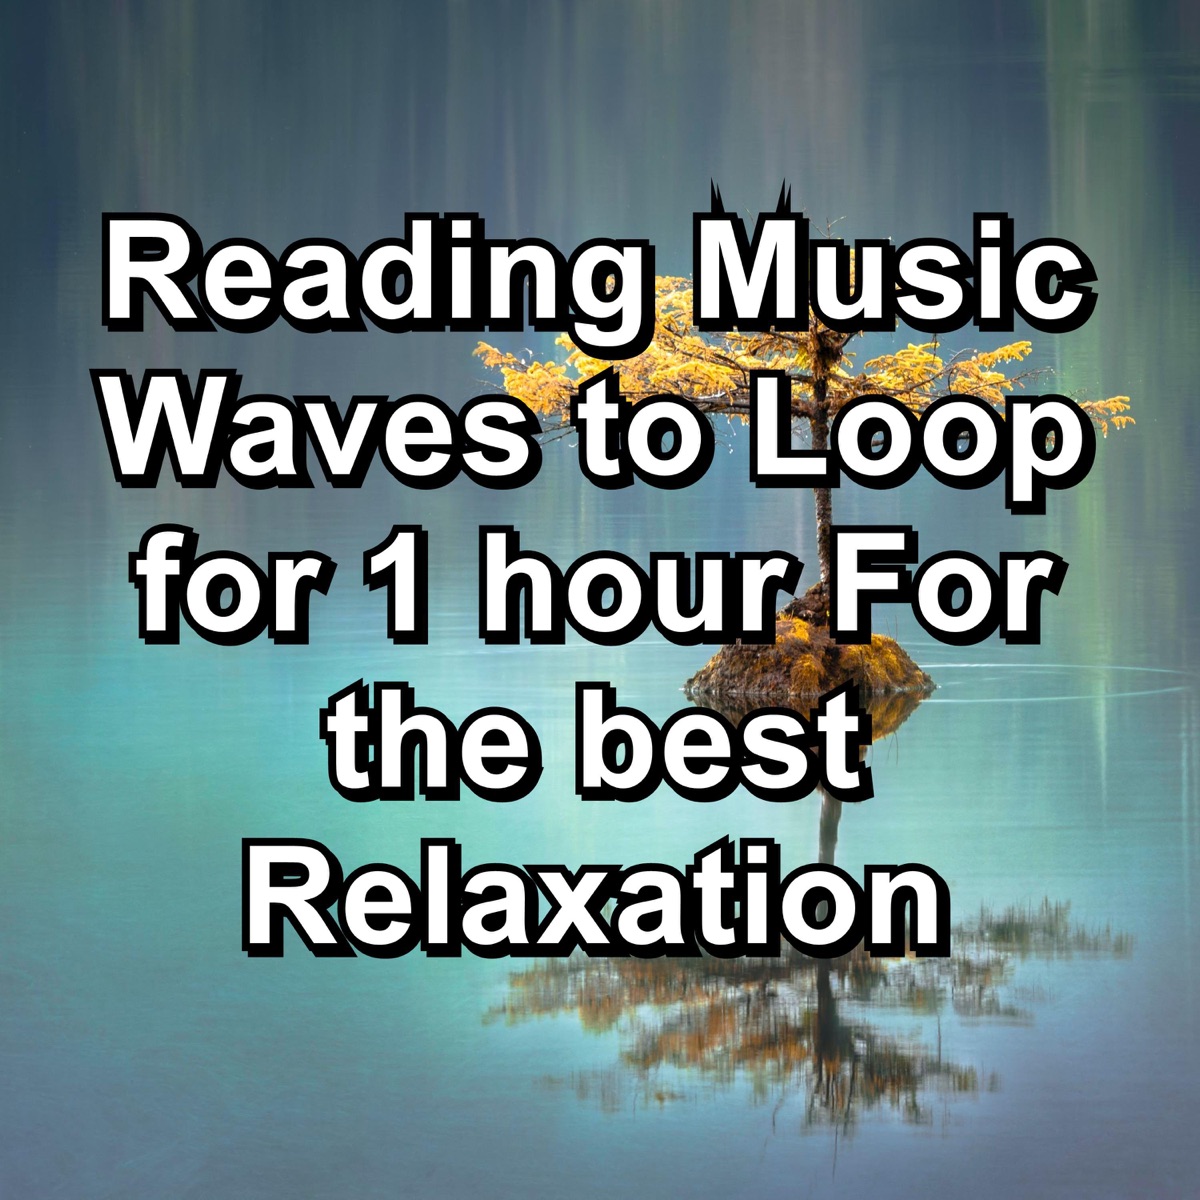 Reading Music Waves to Loop for 1 hour For the best Relaxation